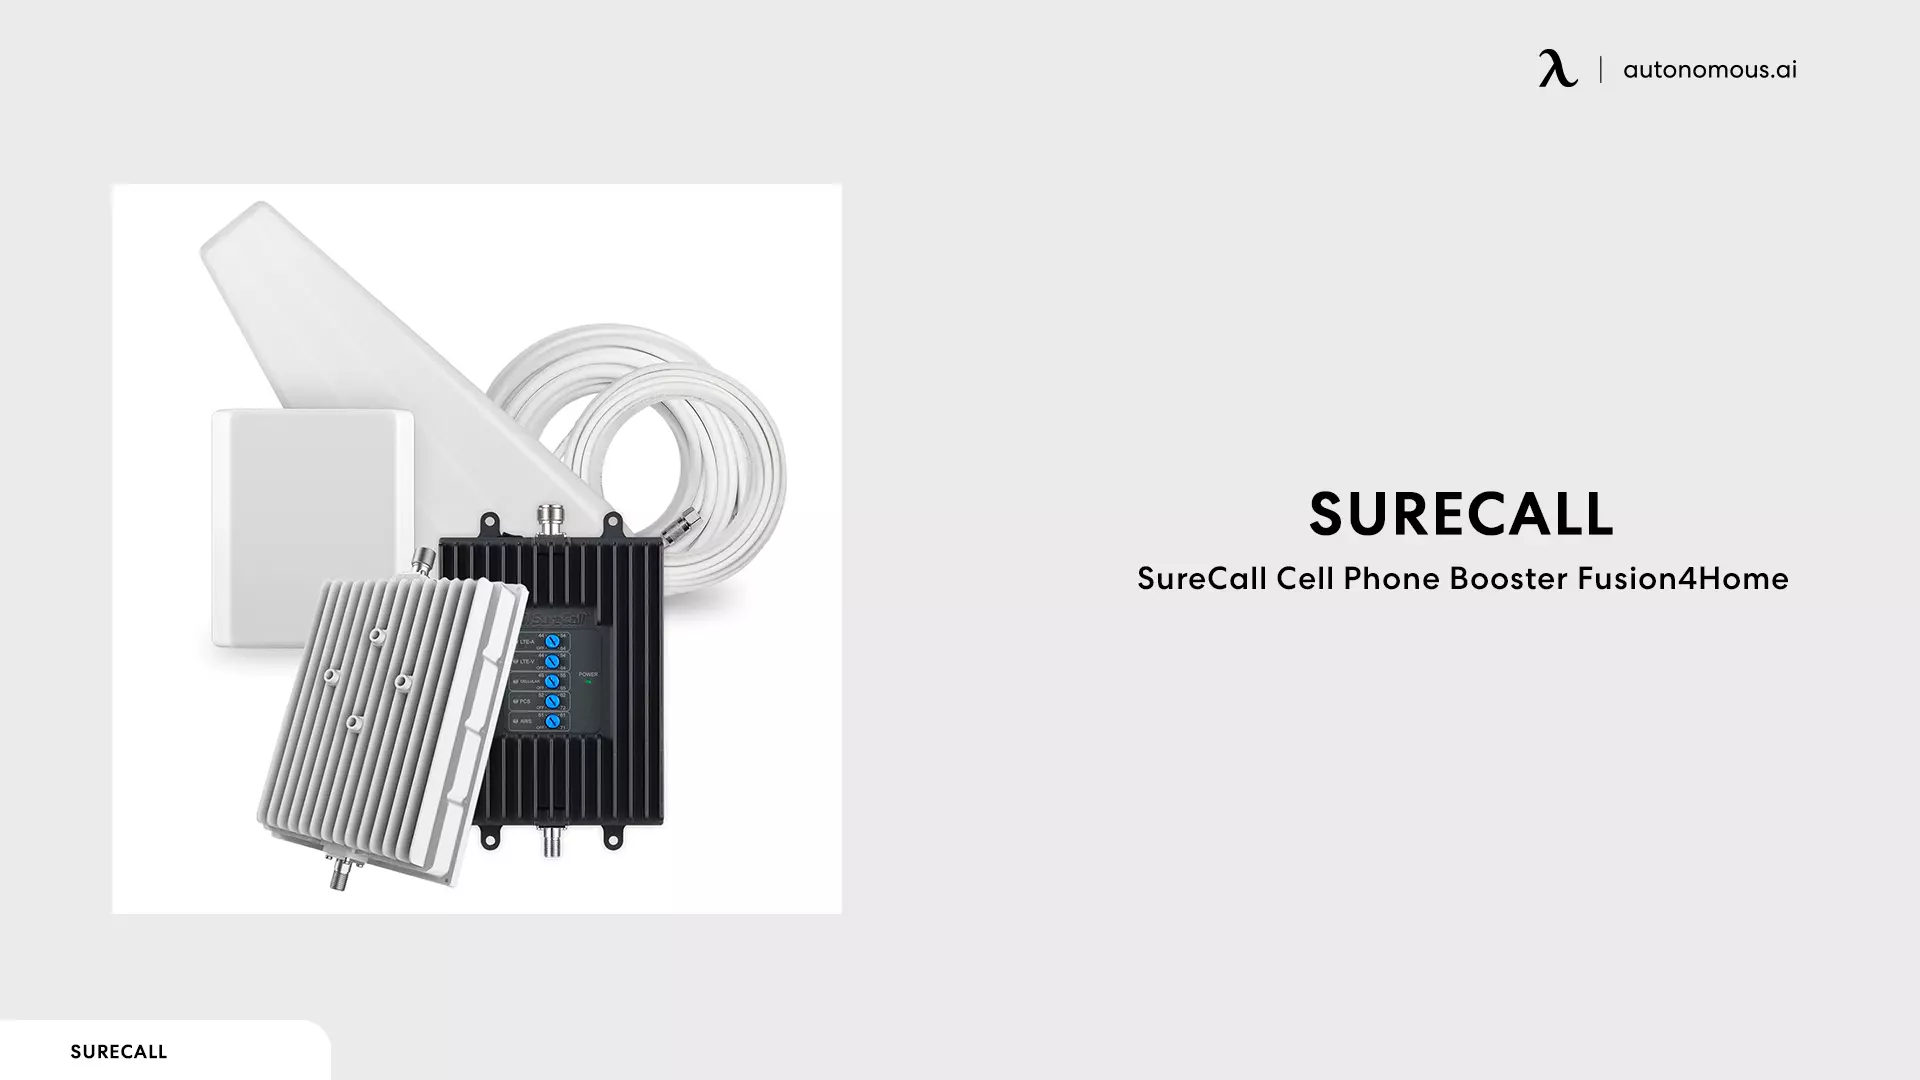 SureCall Cell Phone Booster Fusion4Home